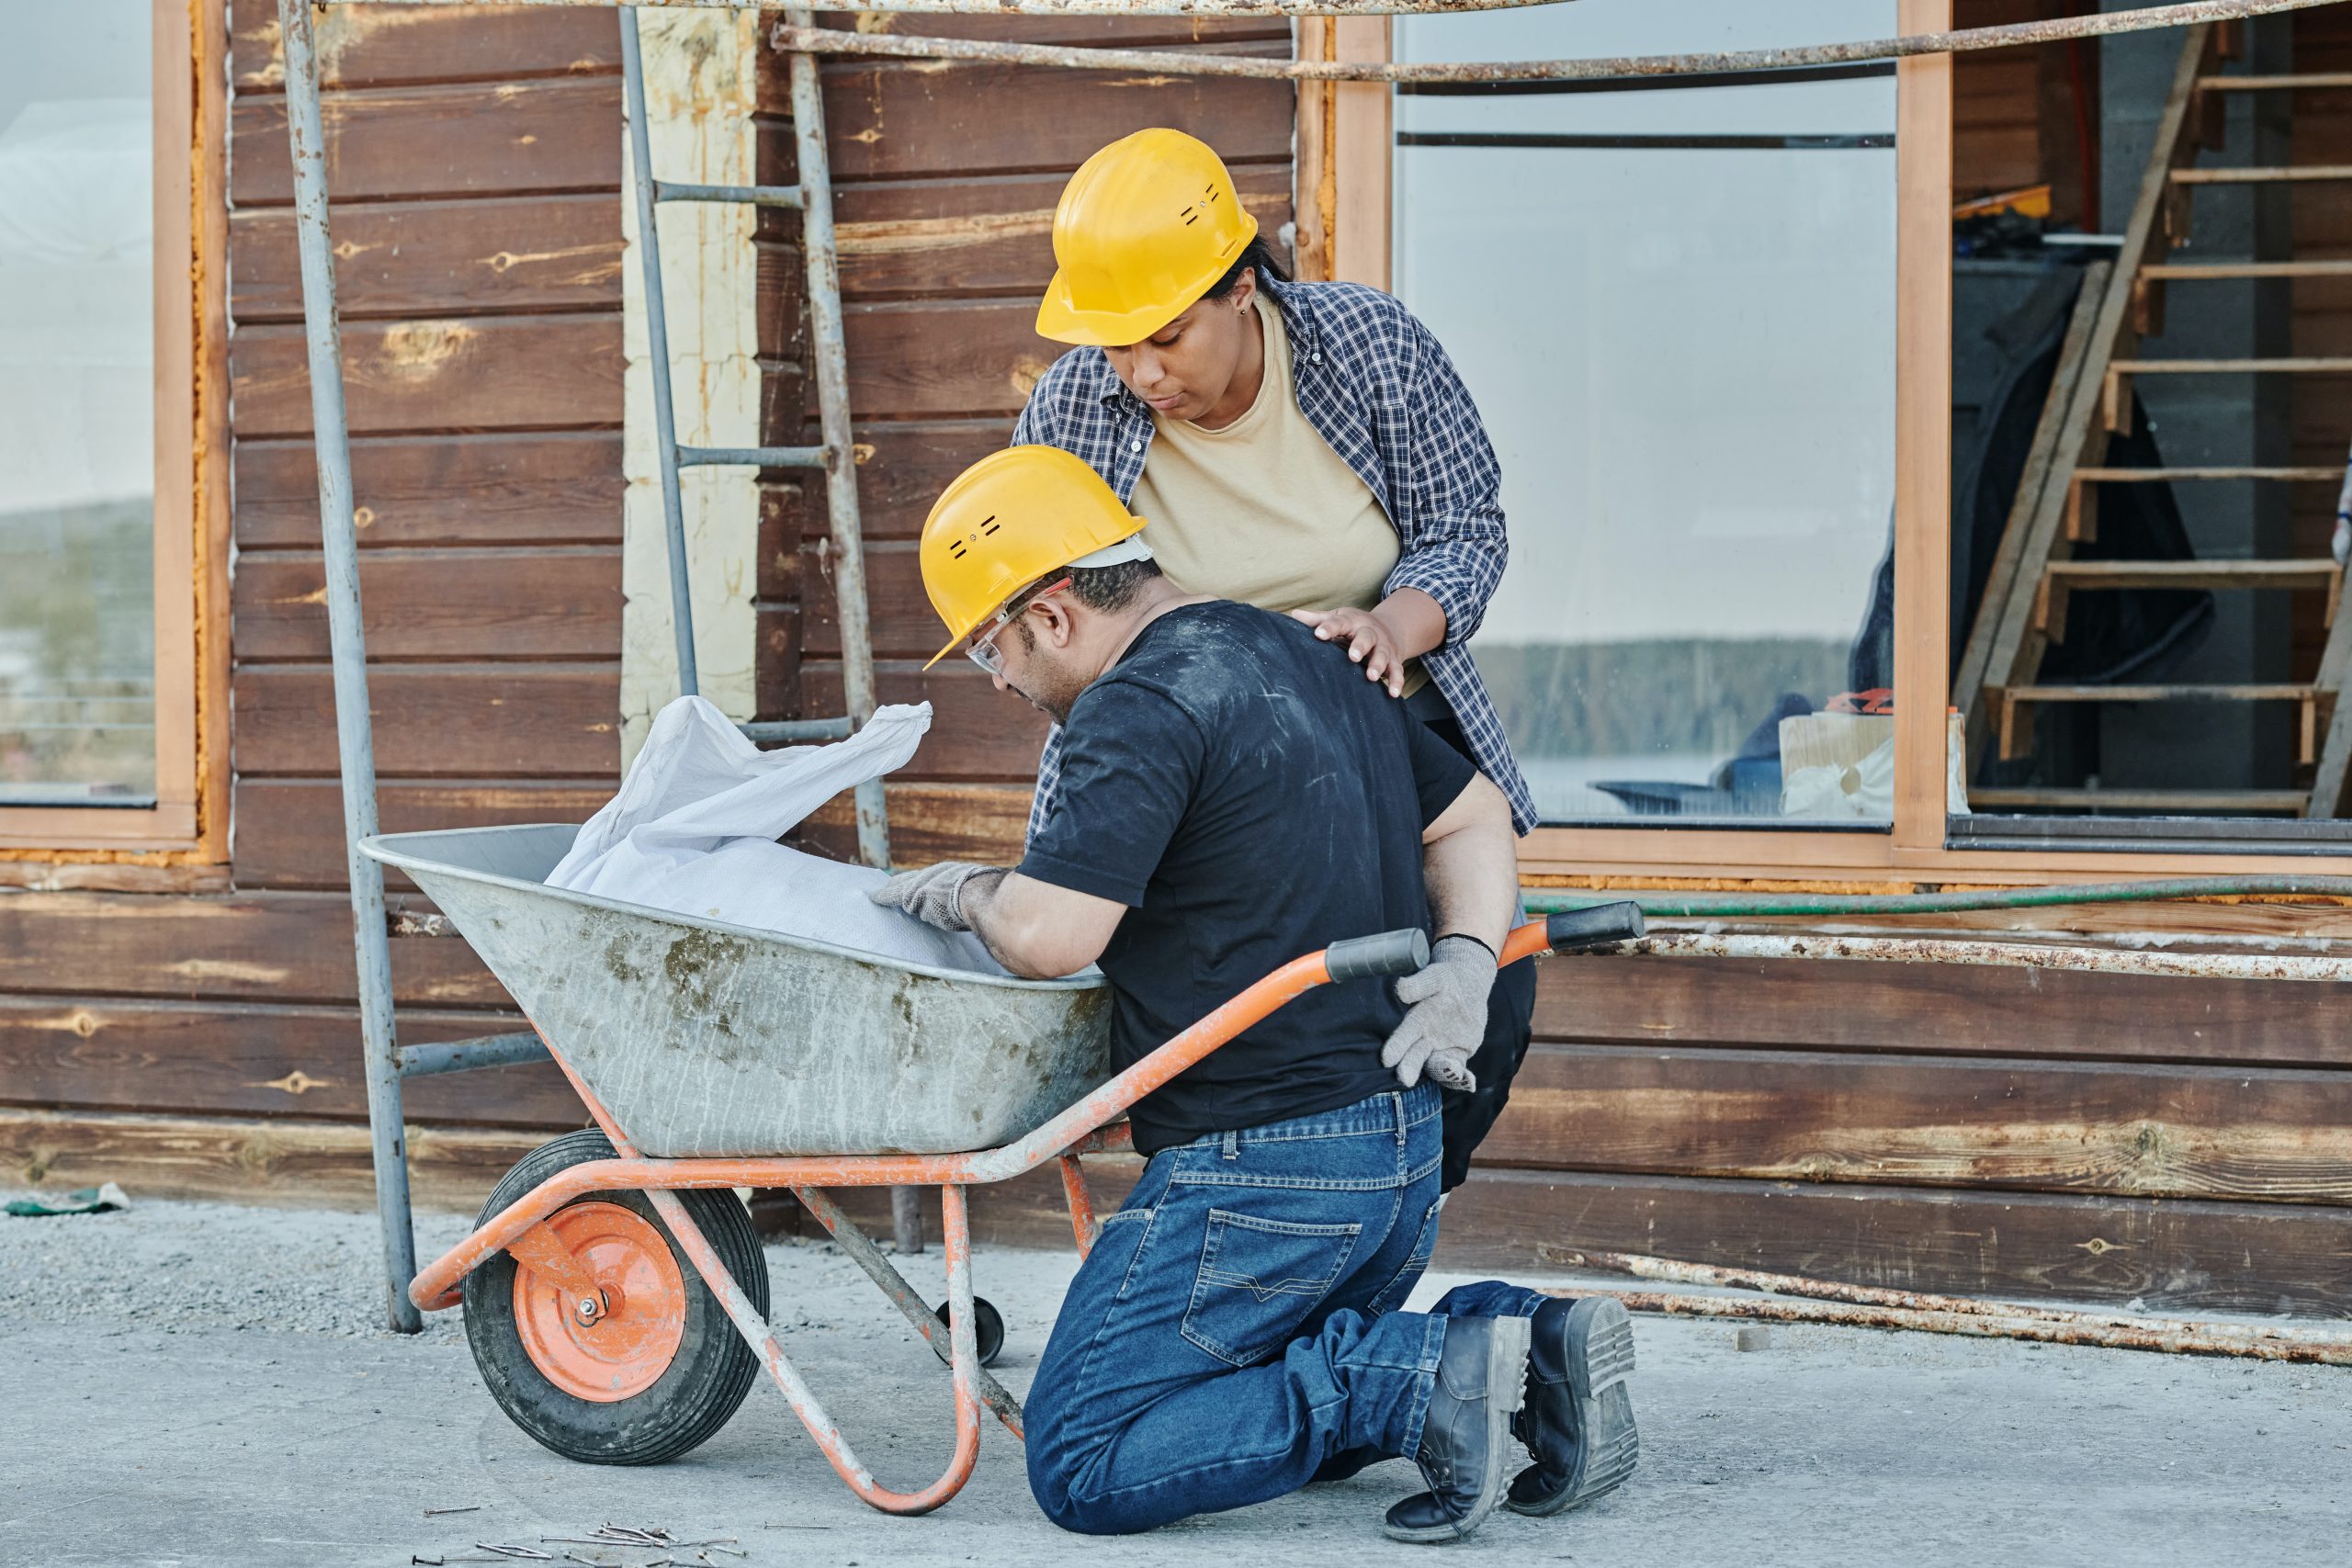 A worker kneels down next to his wheel barrow and touches his pained lower back while another worker attempts to help him.